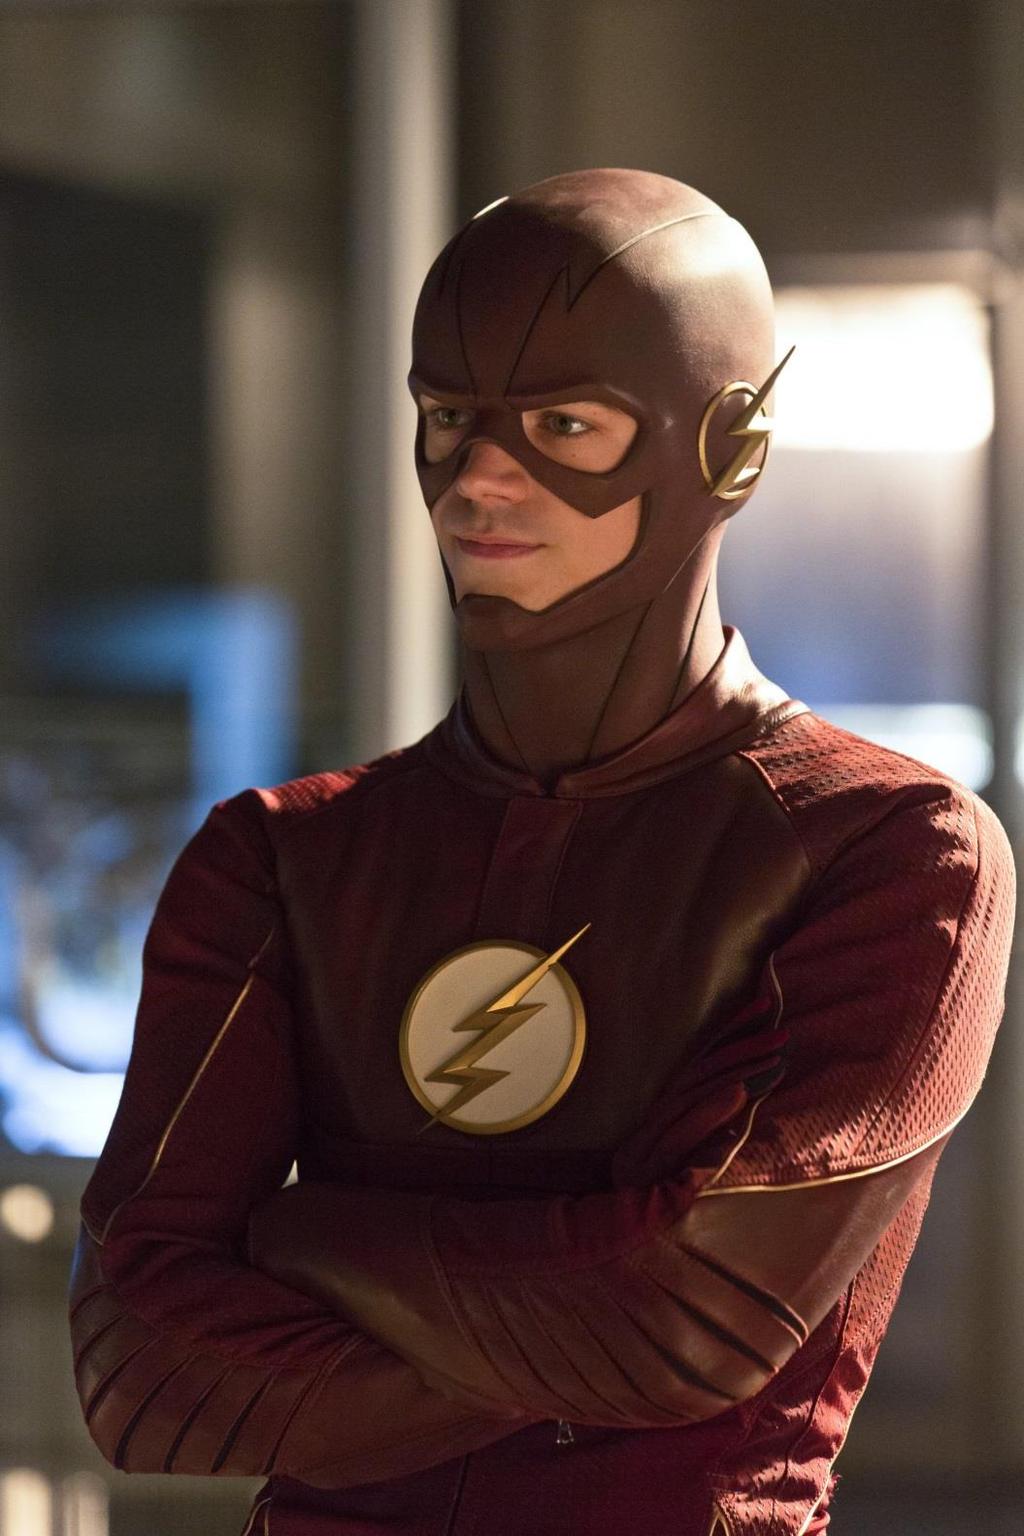 The Flash Series 3 Central City Police scientist Barry Allen (Grant Gustin) has been standing still emotionally since the day his mother was murdered and his father unjustly jailed for the crime.